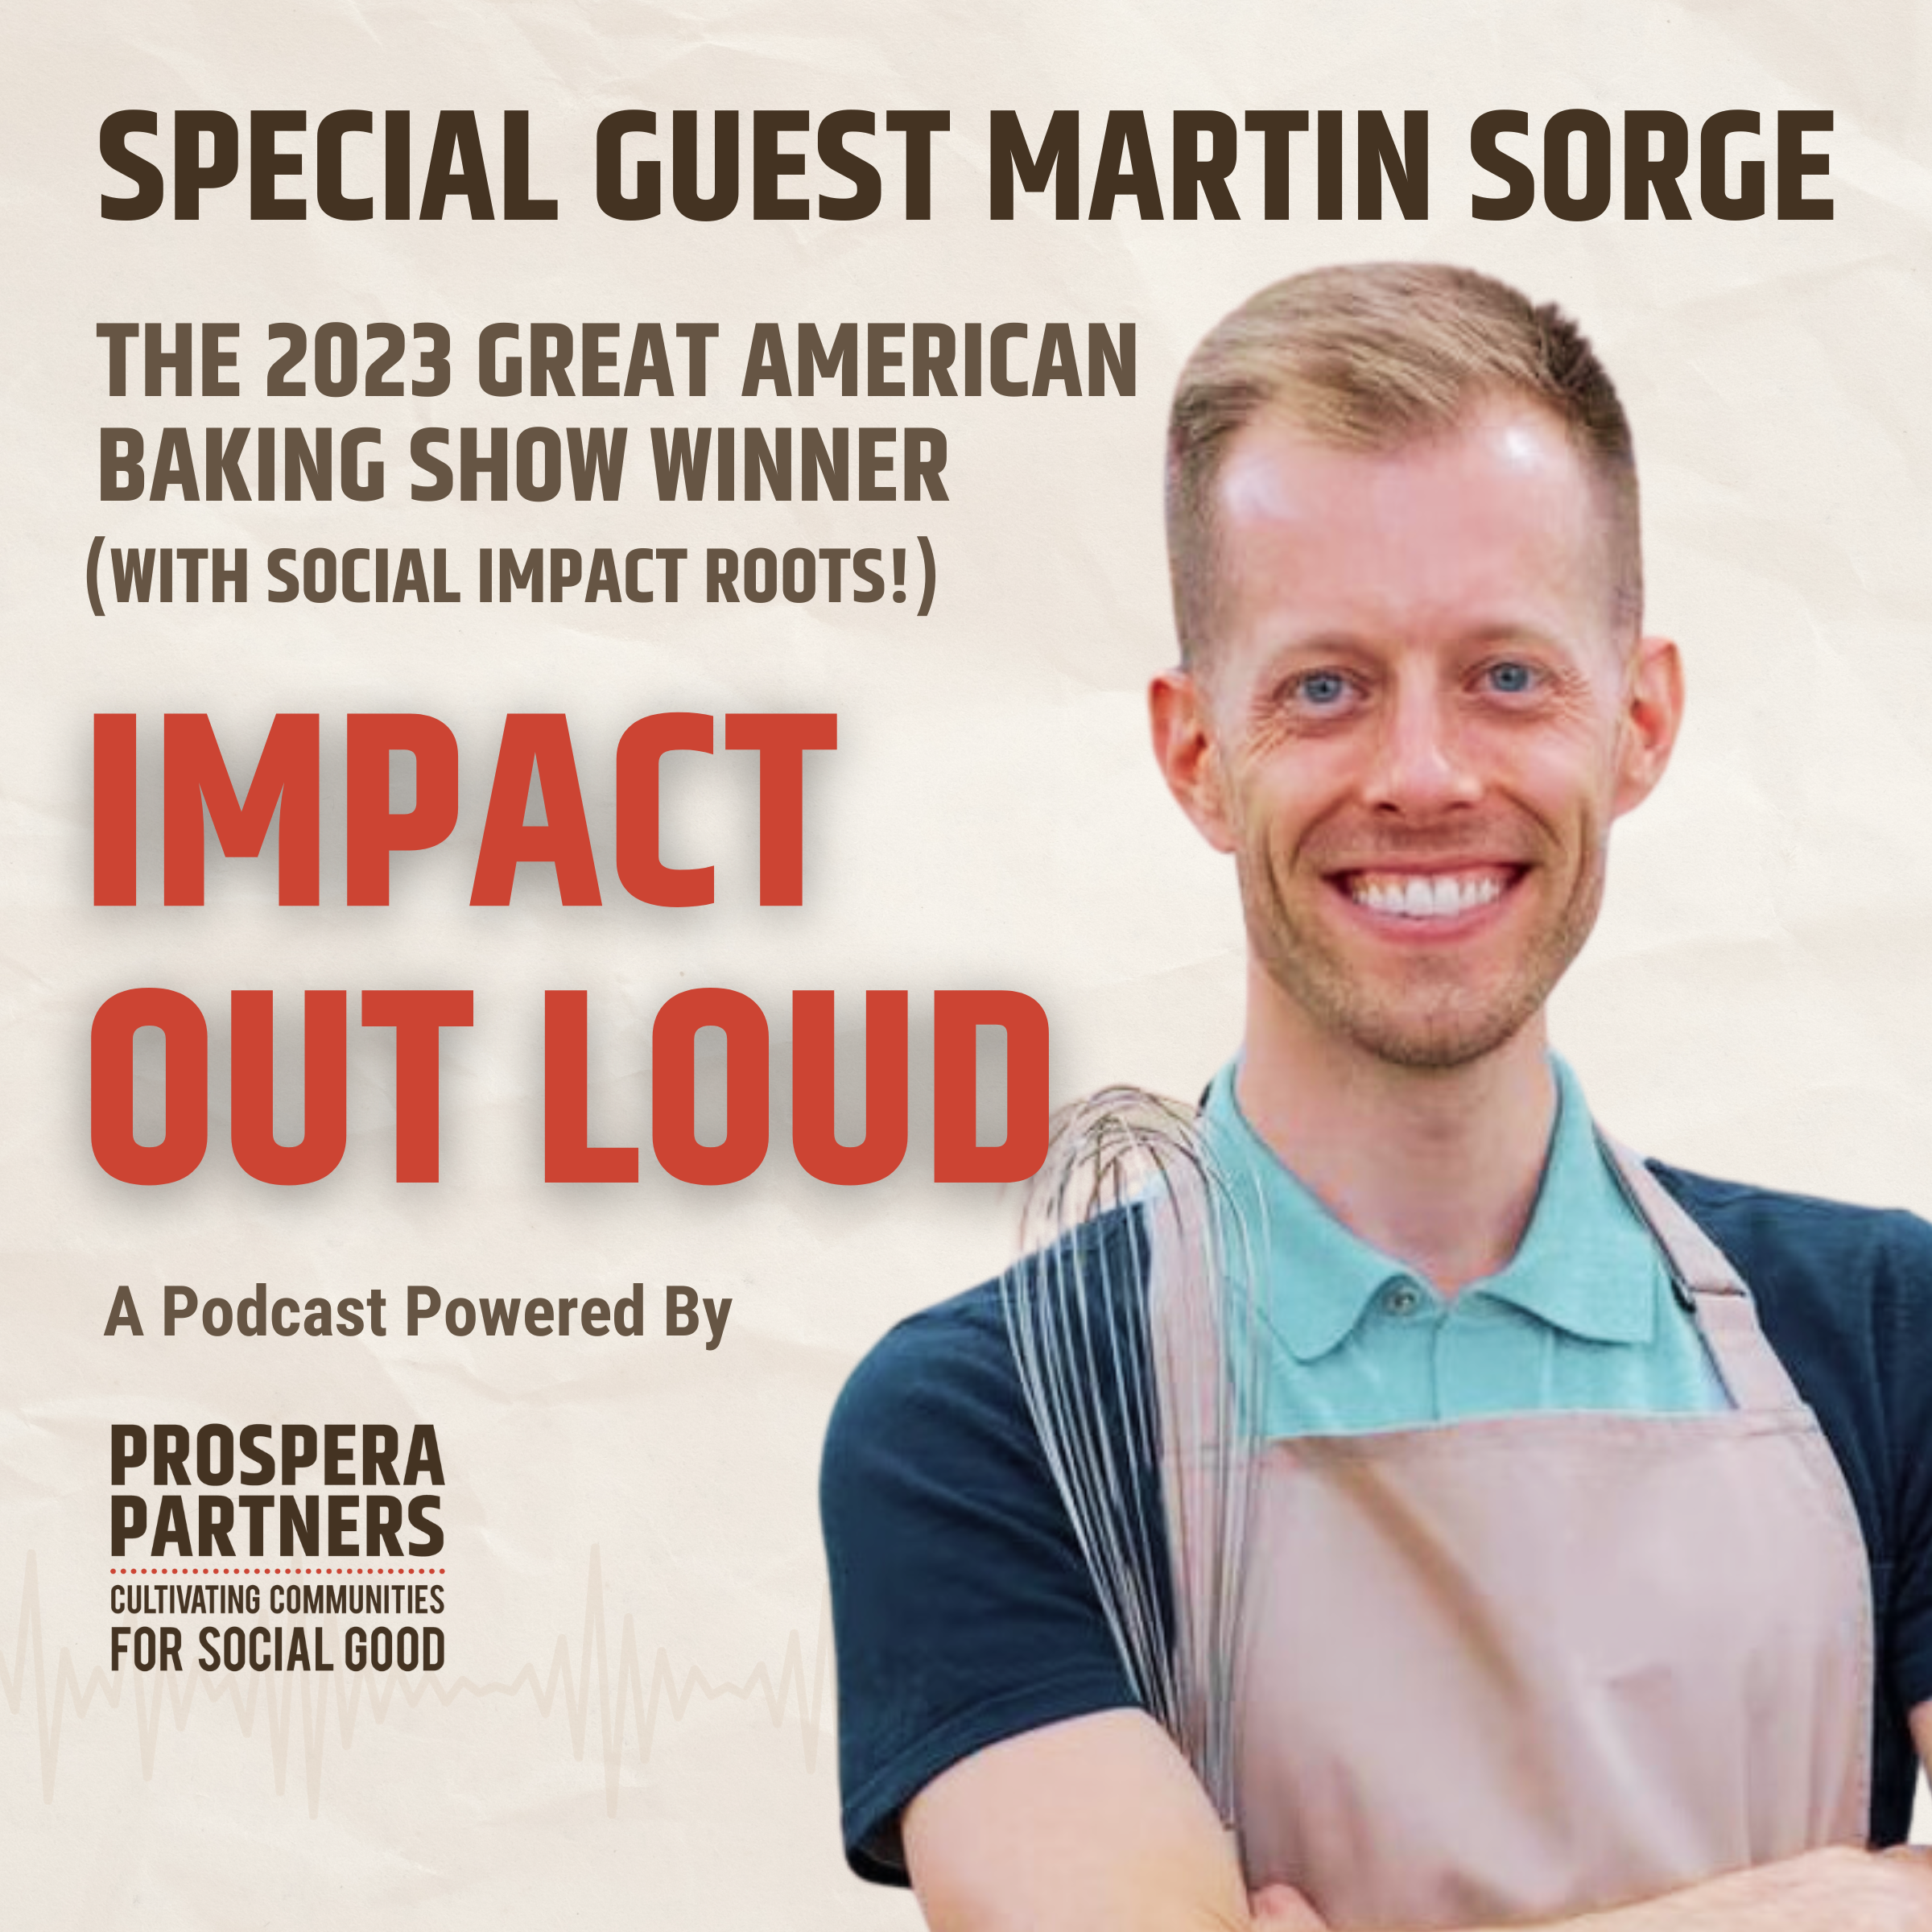 Special guest Martin Sorge, the 2023 Great American Baking Show Winner (with Social Impact Roots). Impact Out Loud a podcast powered by Prospera Partners.